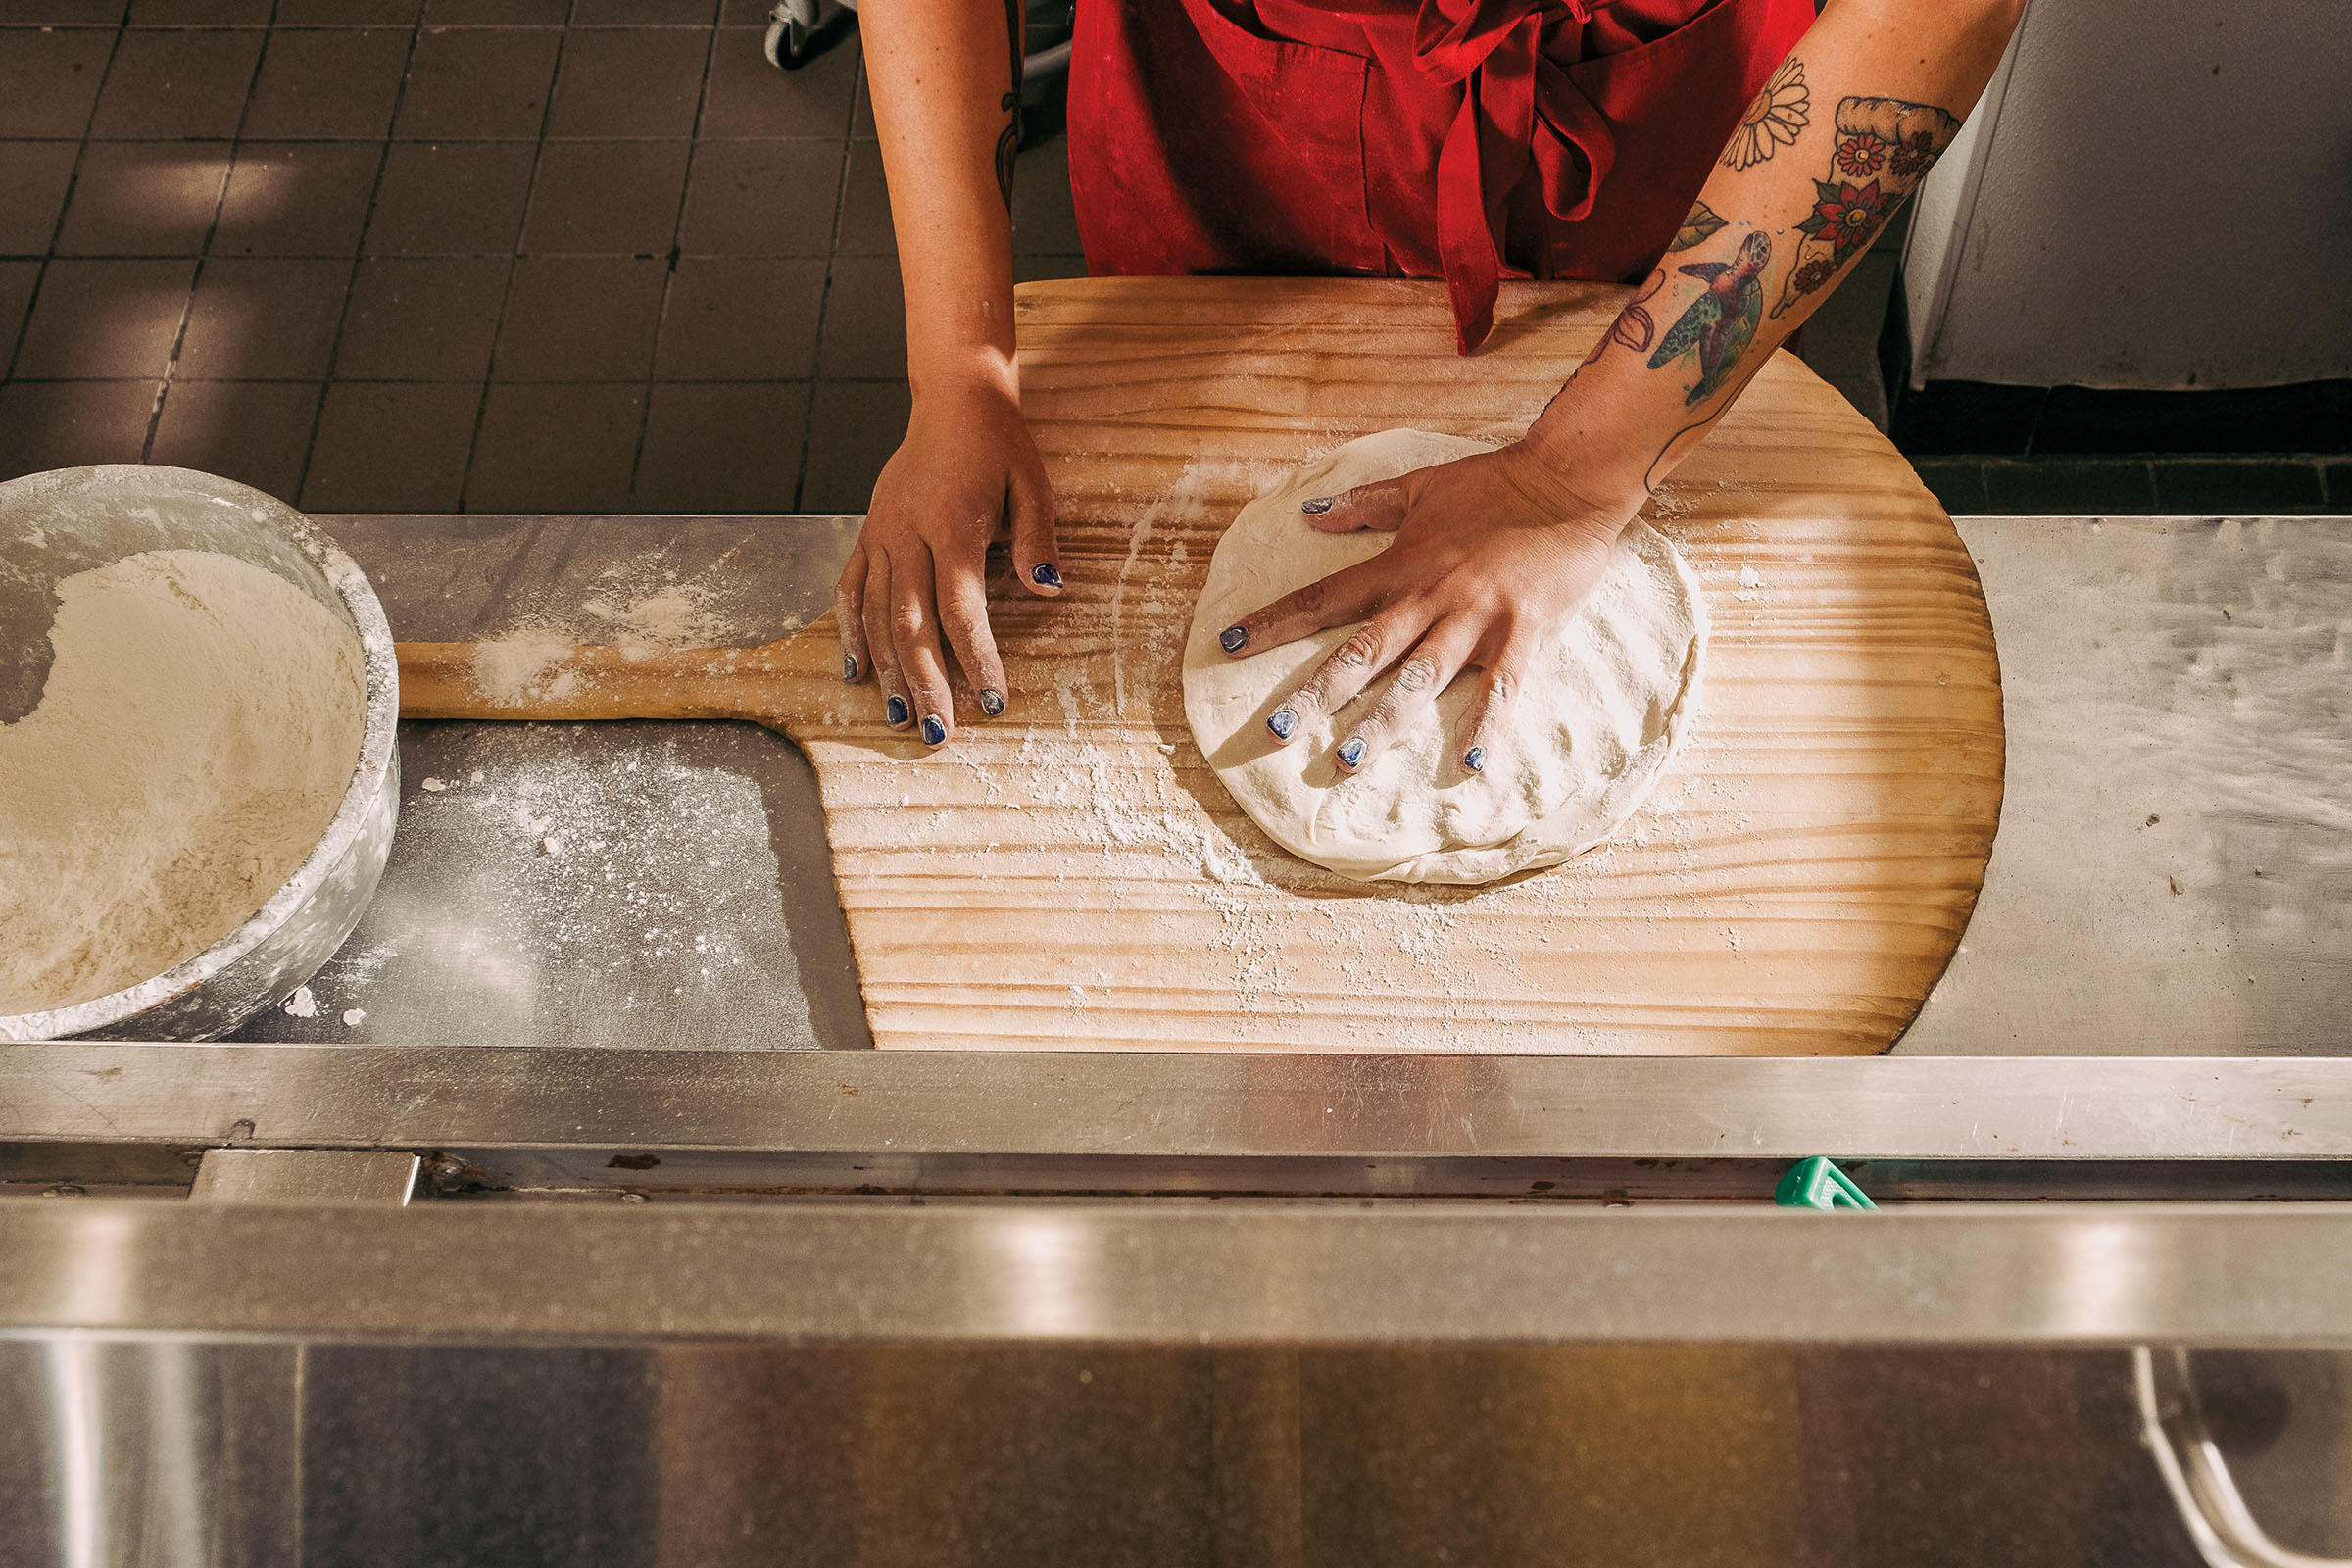 An overhead view of hands working with pizza dough on a wooden peel